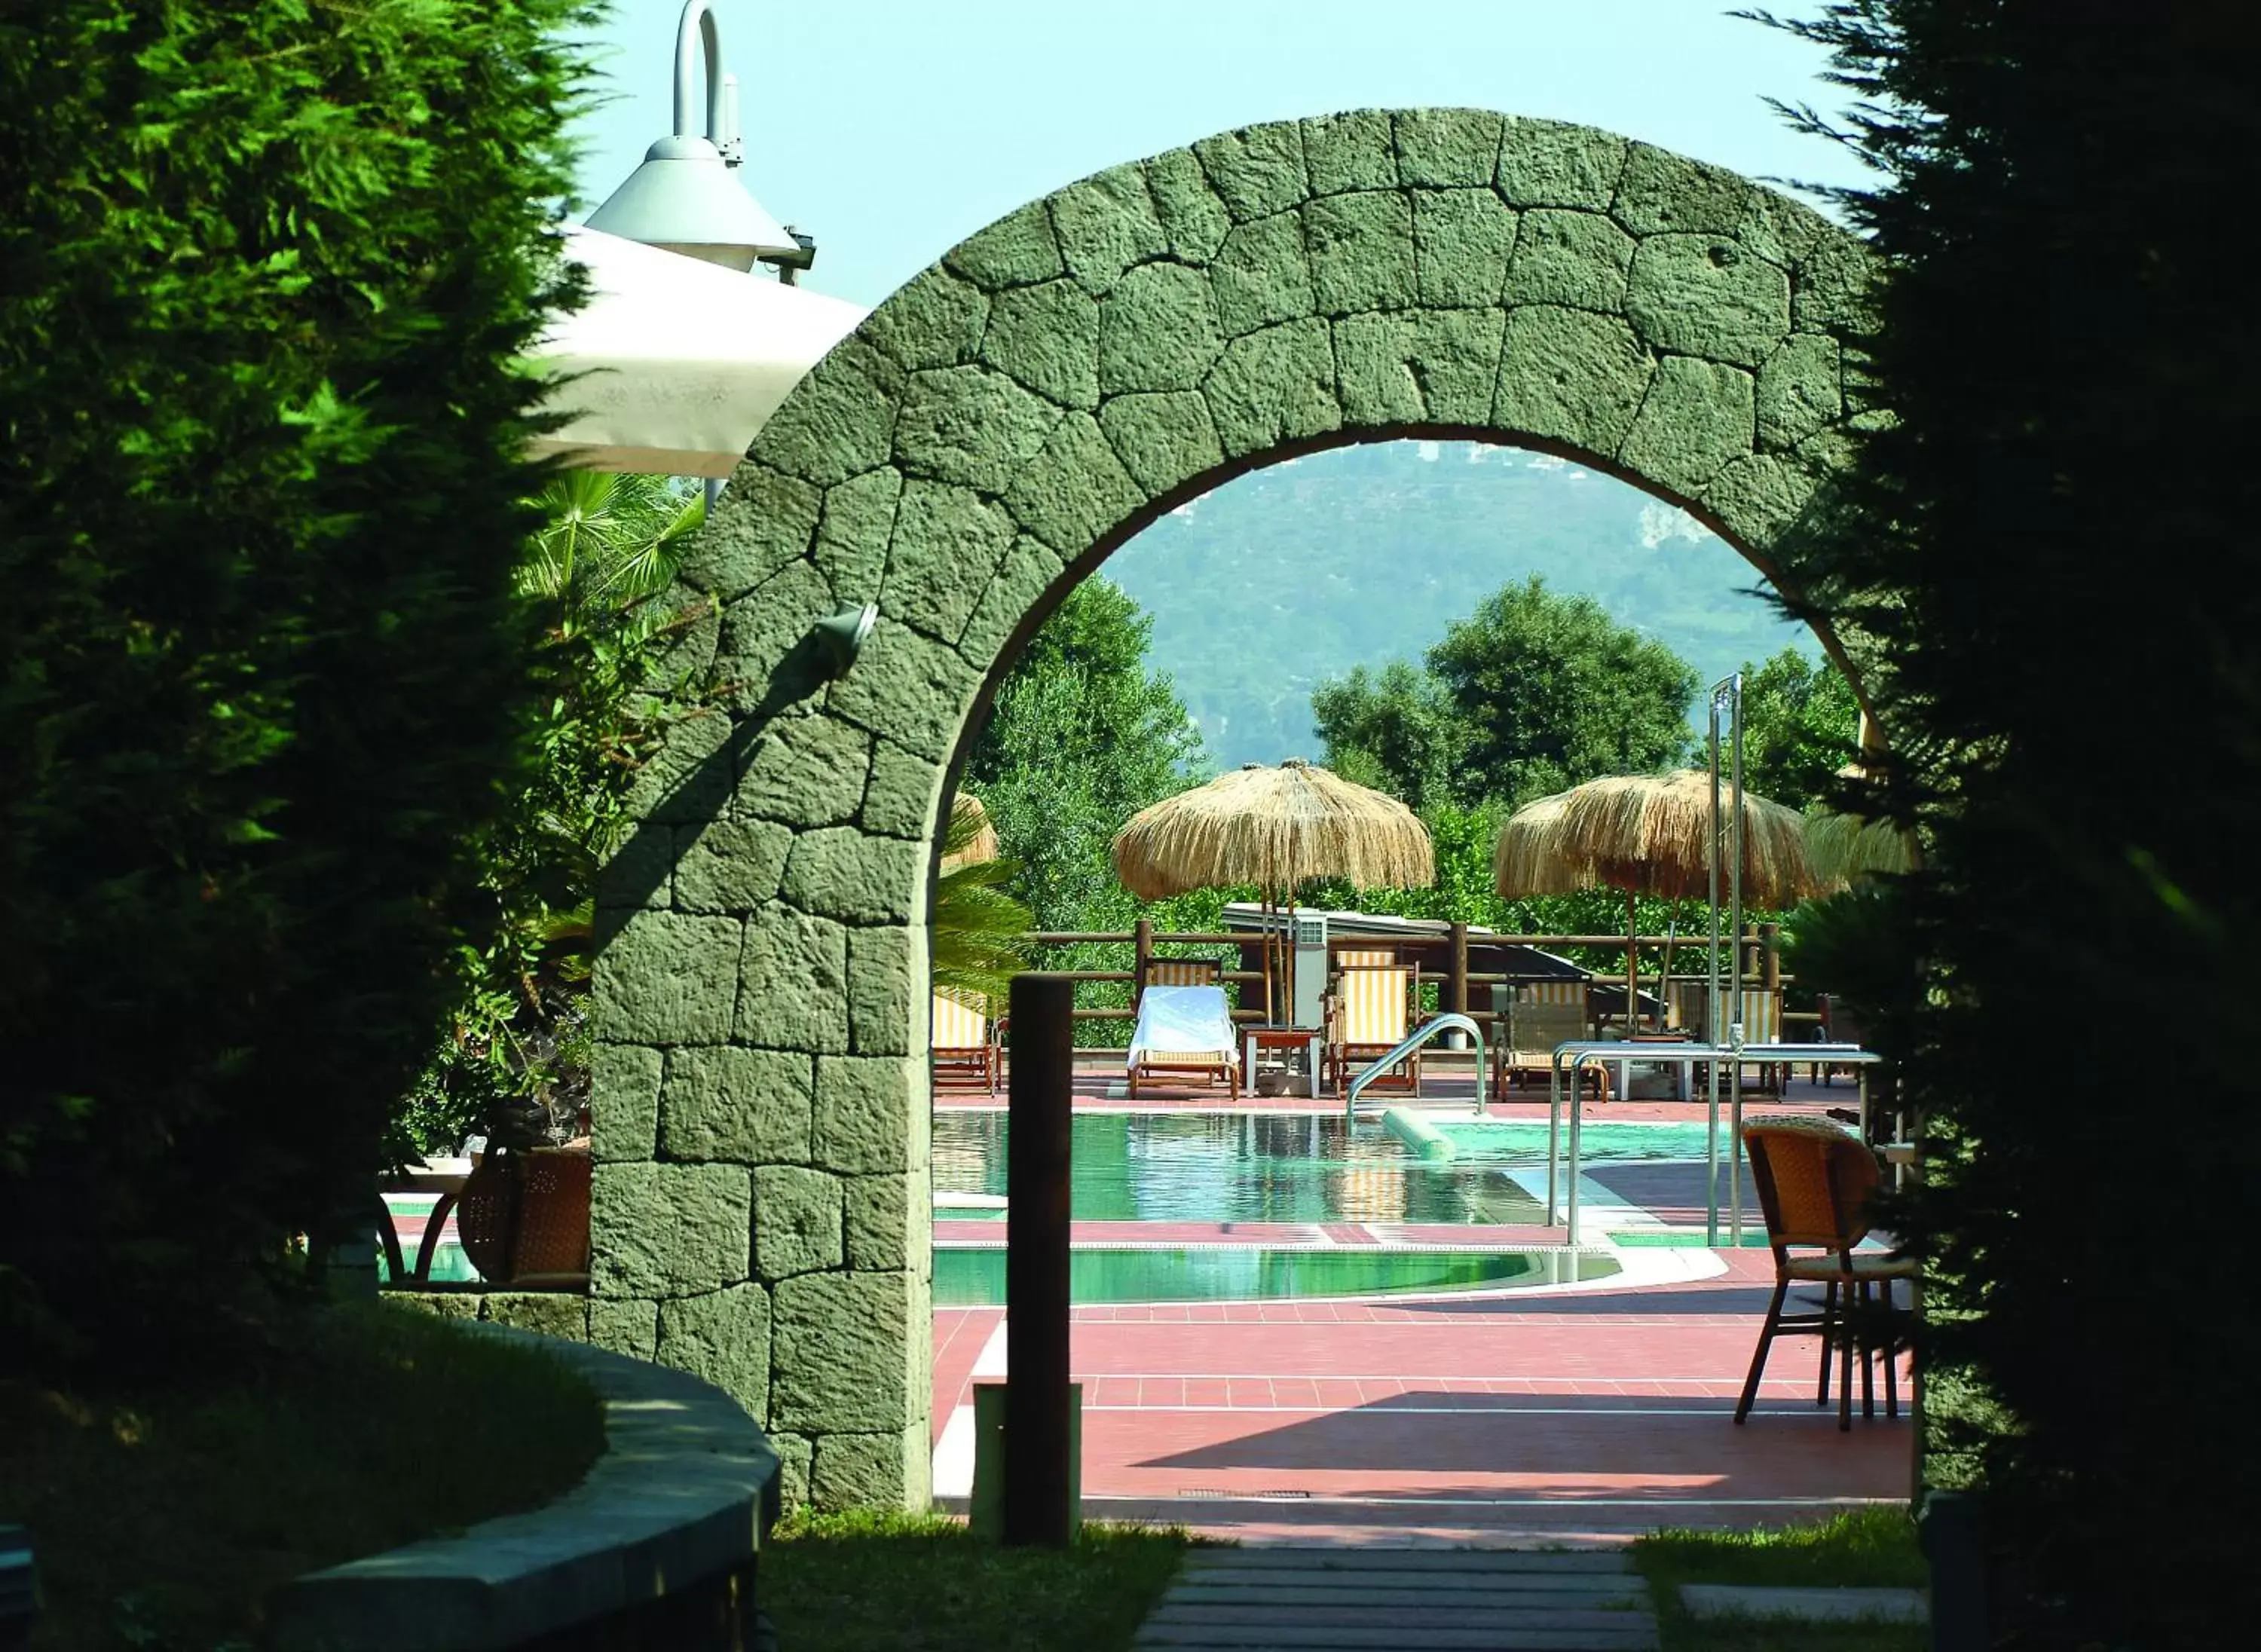 Swimming Pool in Montespina Park Hotel